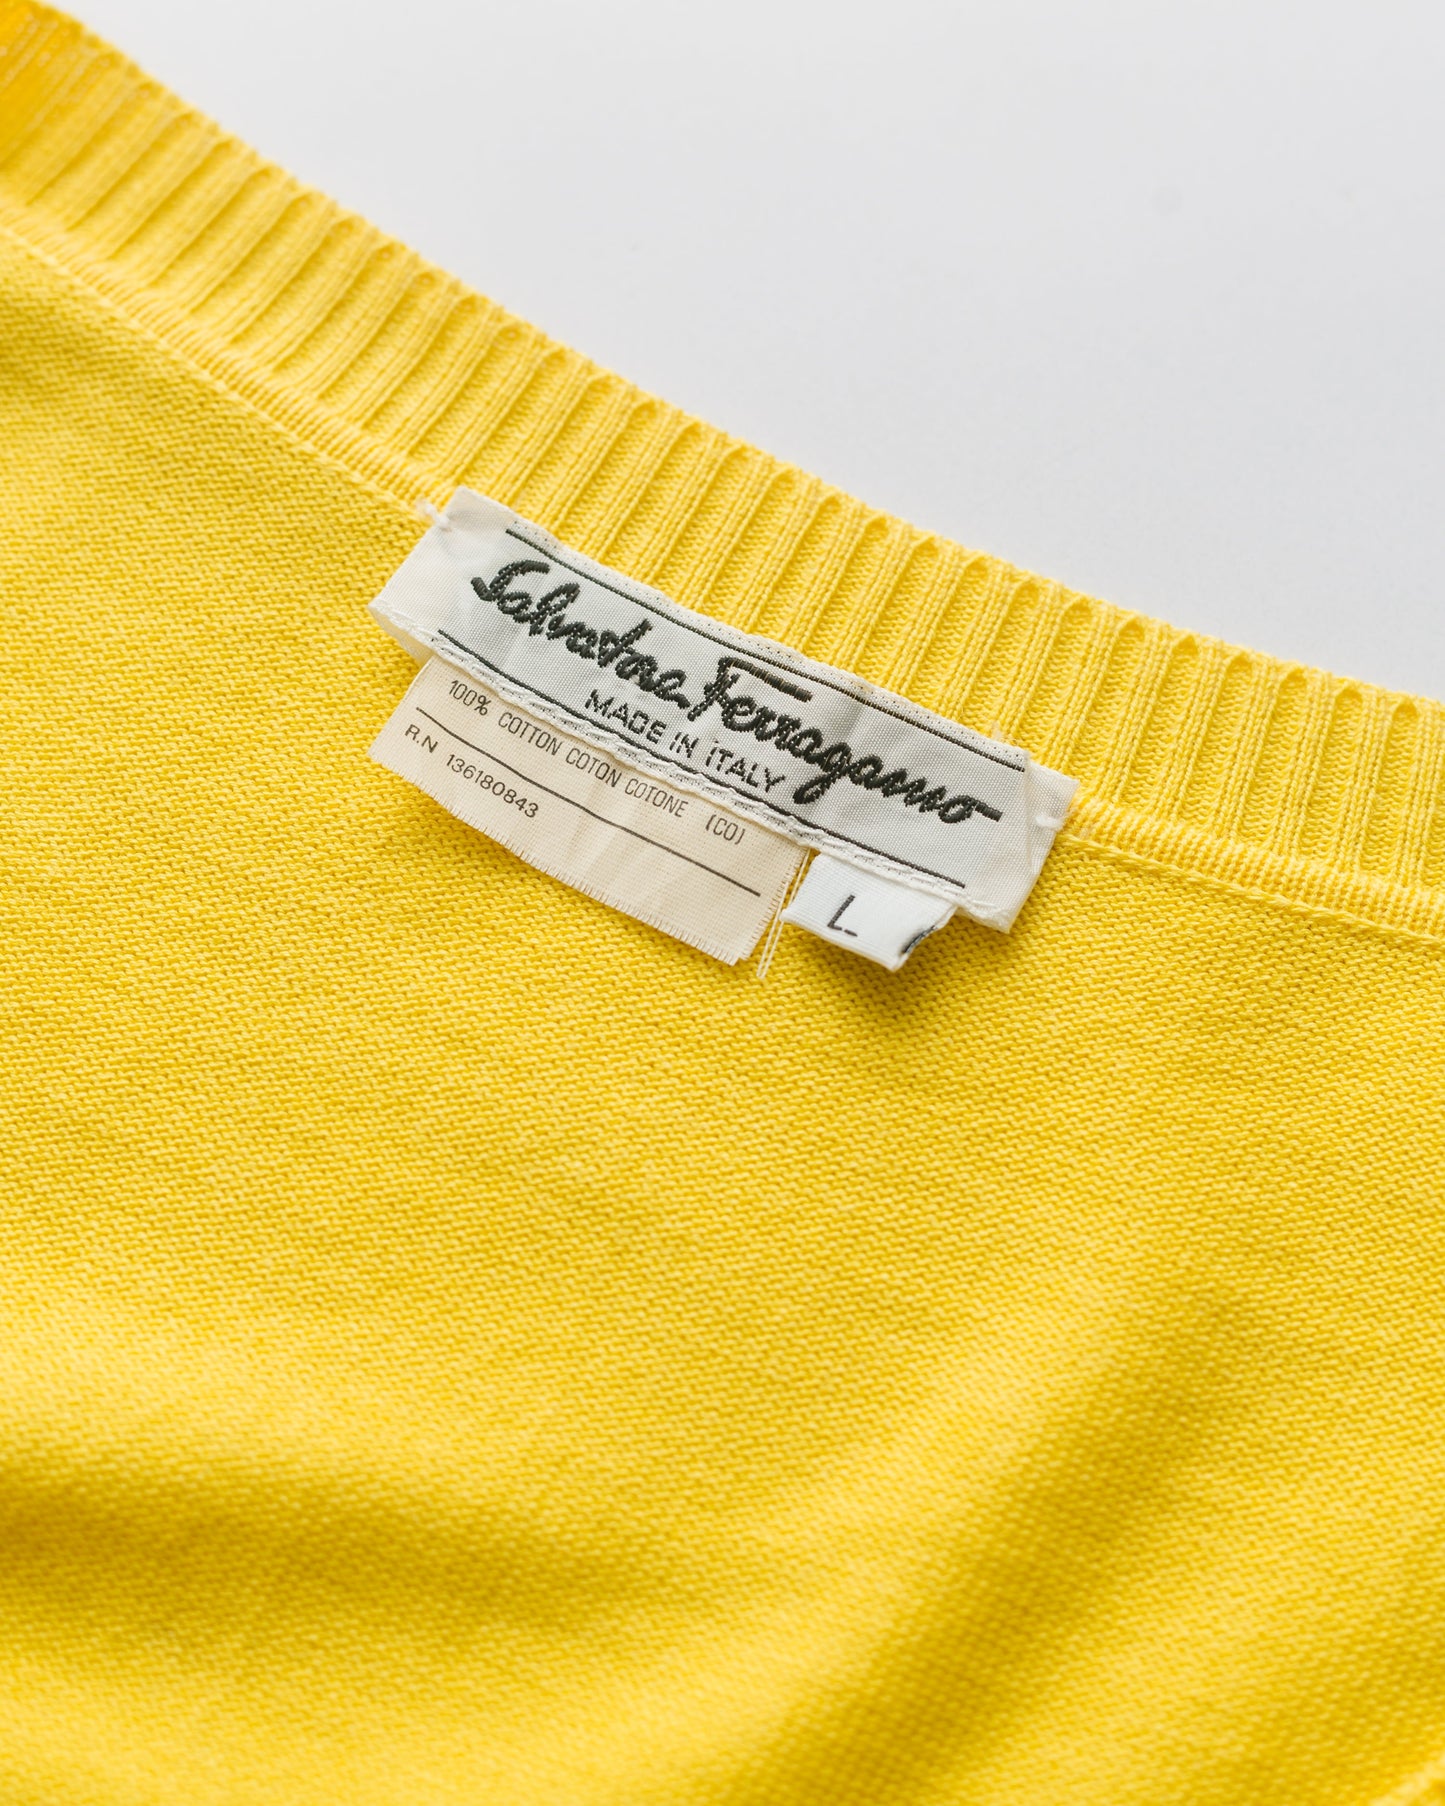 Canary yellow cotton knit top